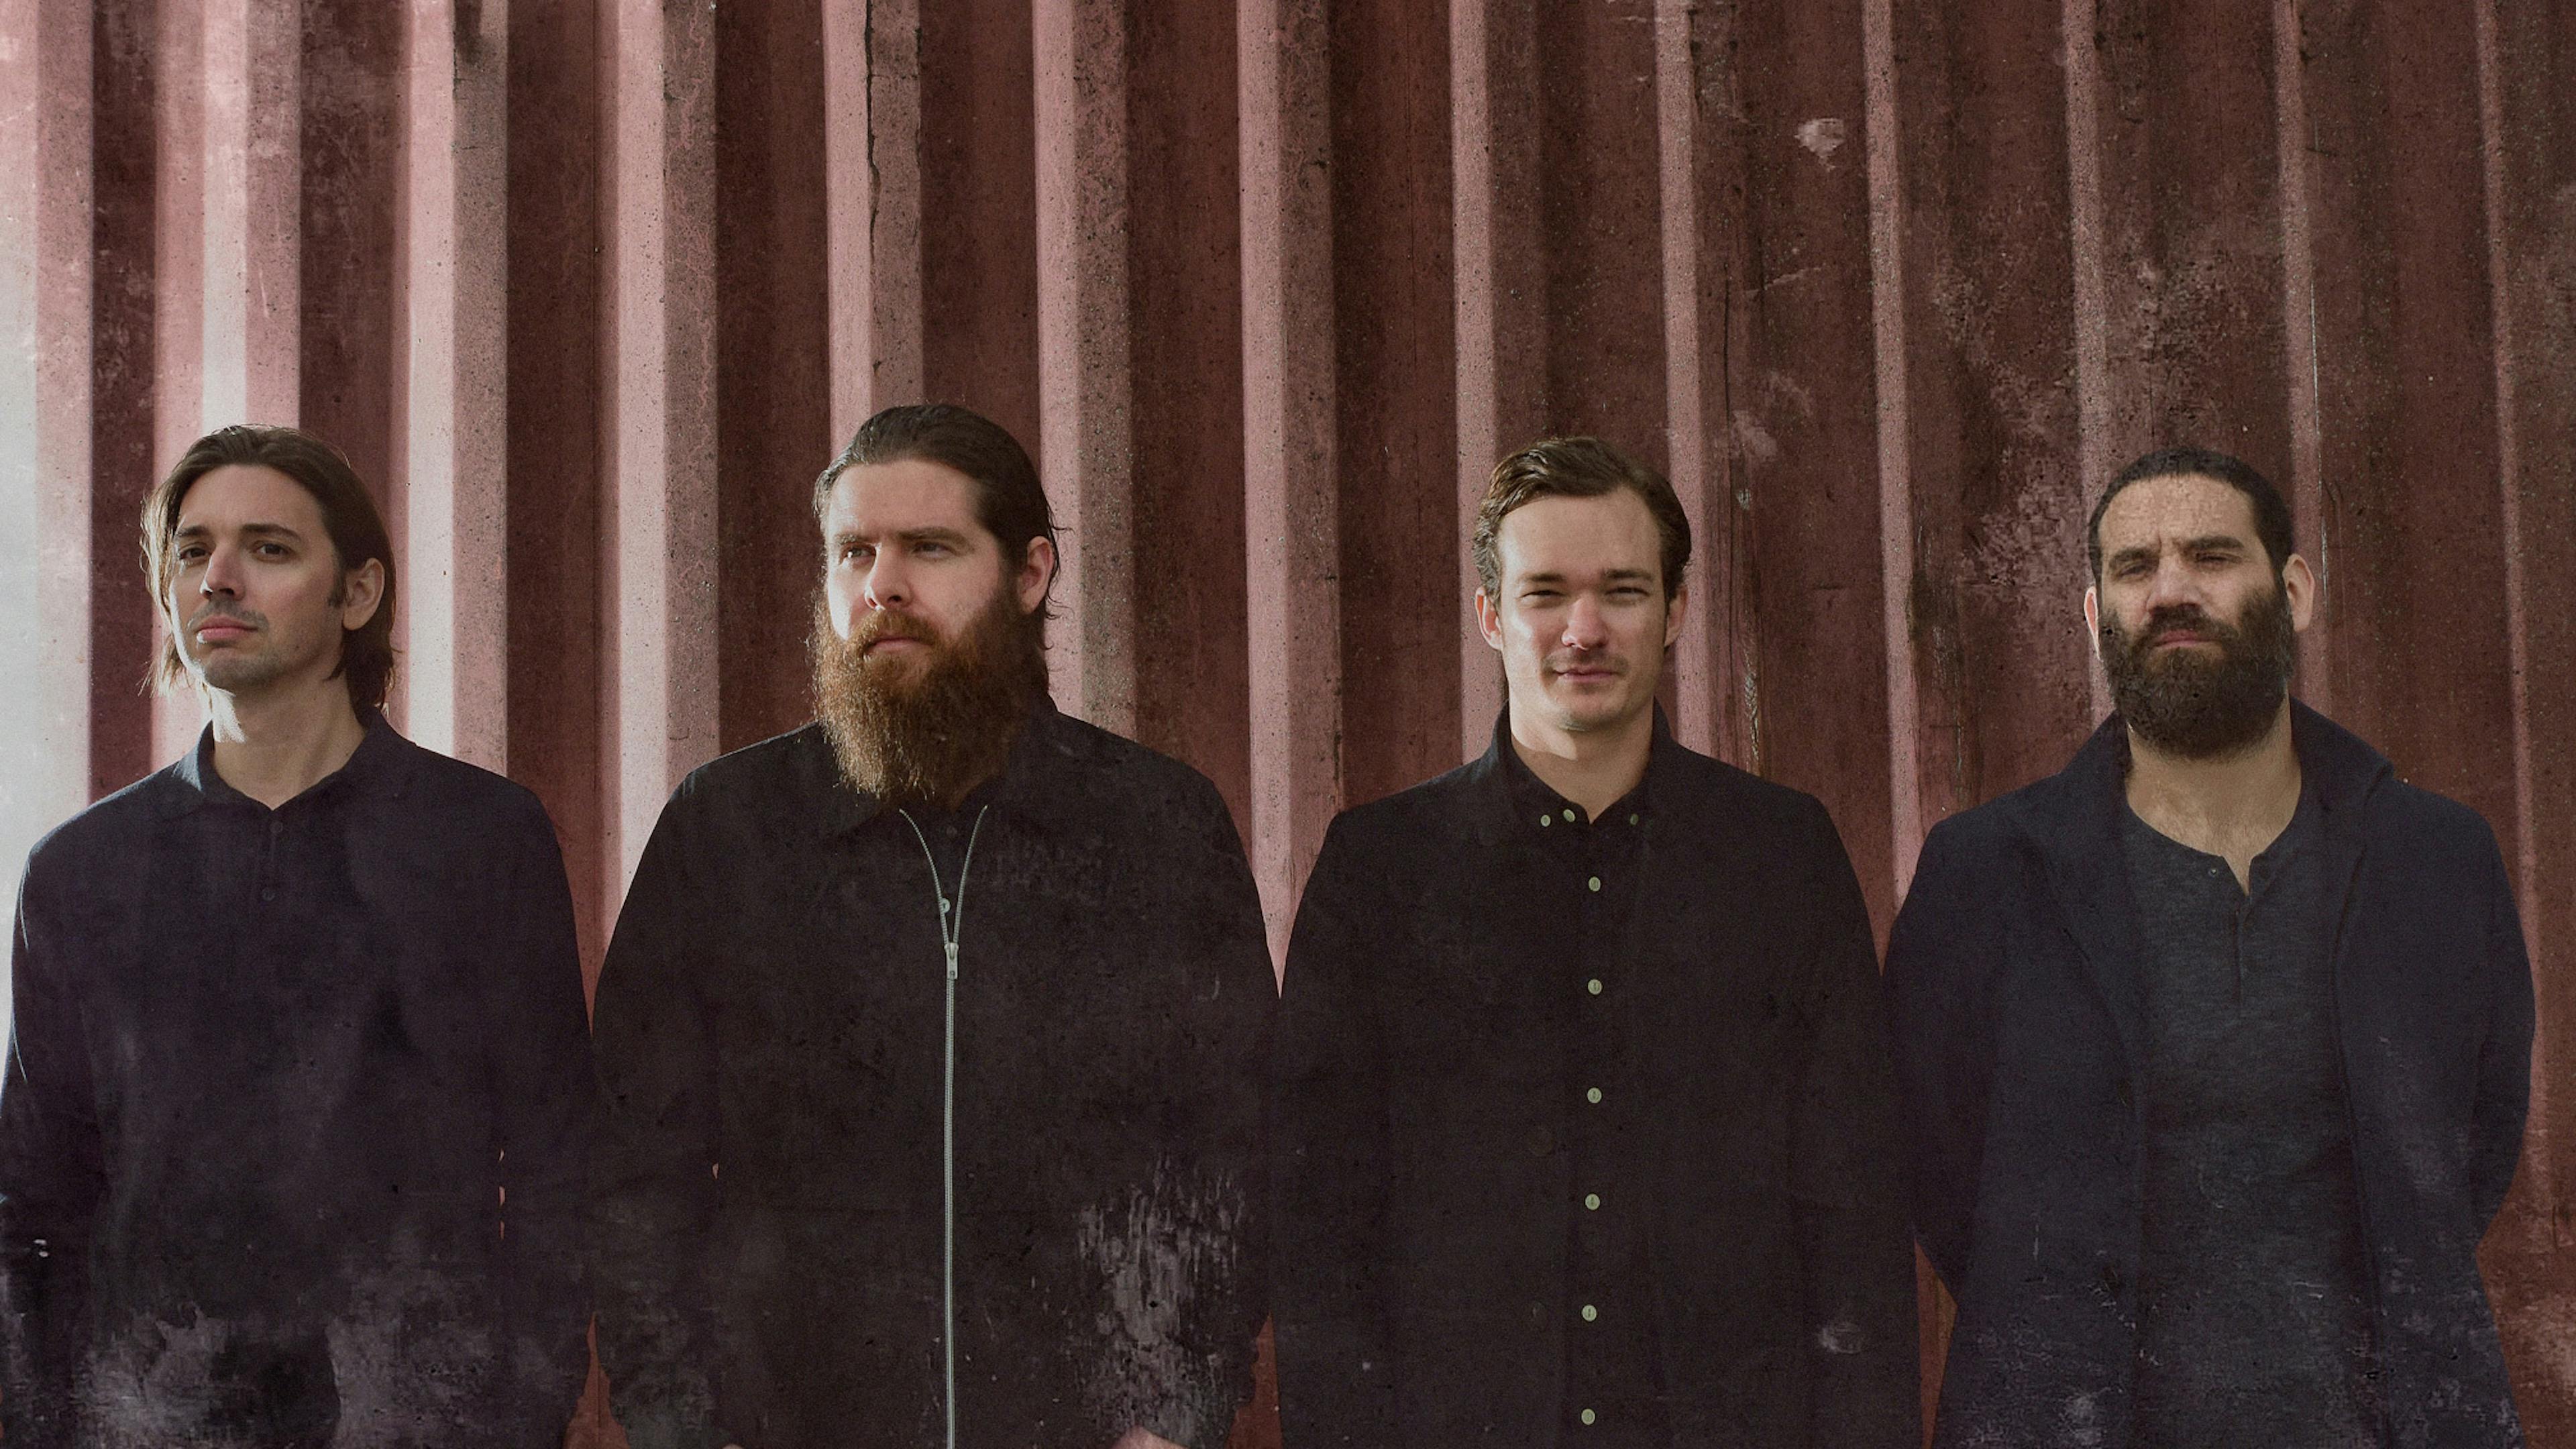 Manchester Orchestra have released a new single and video, Keel Timing